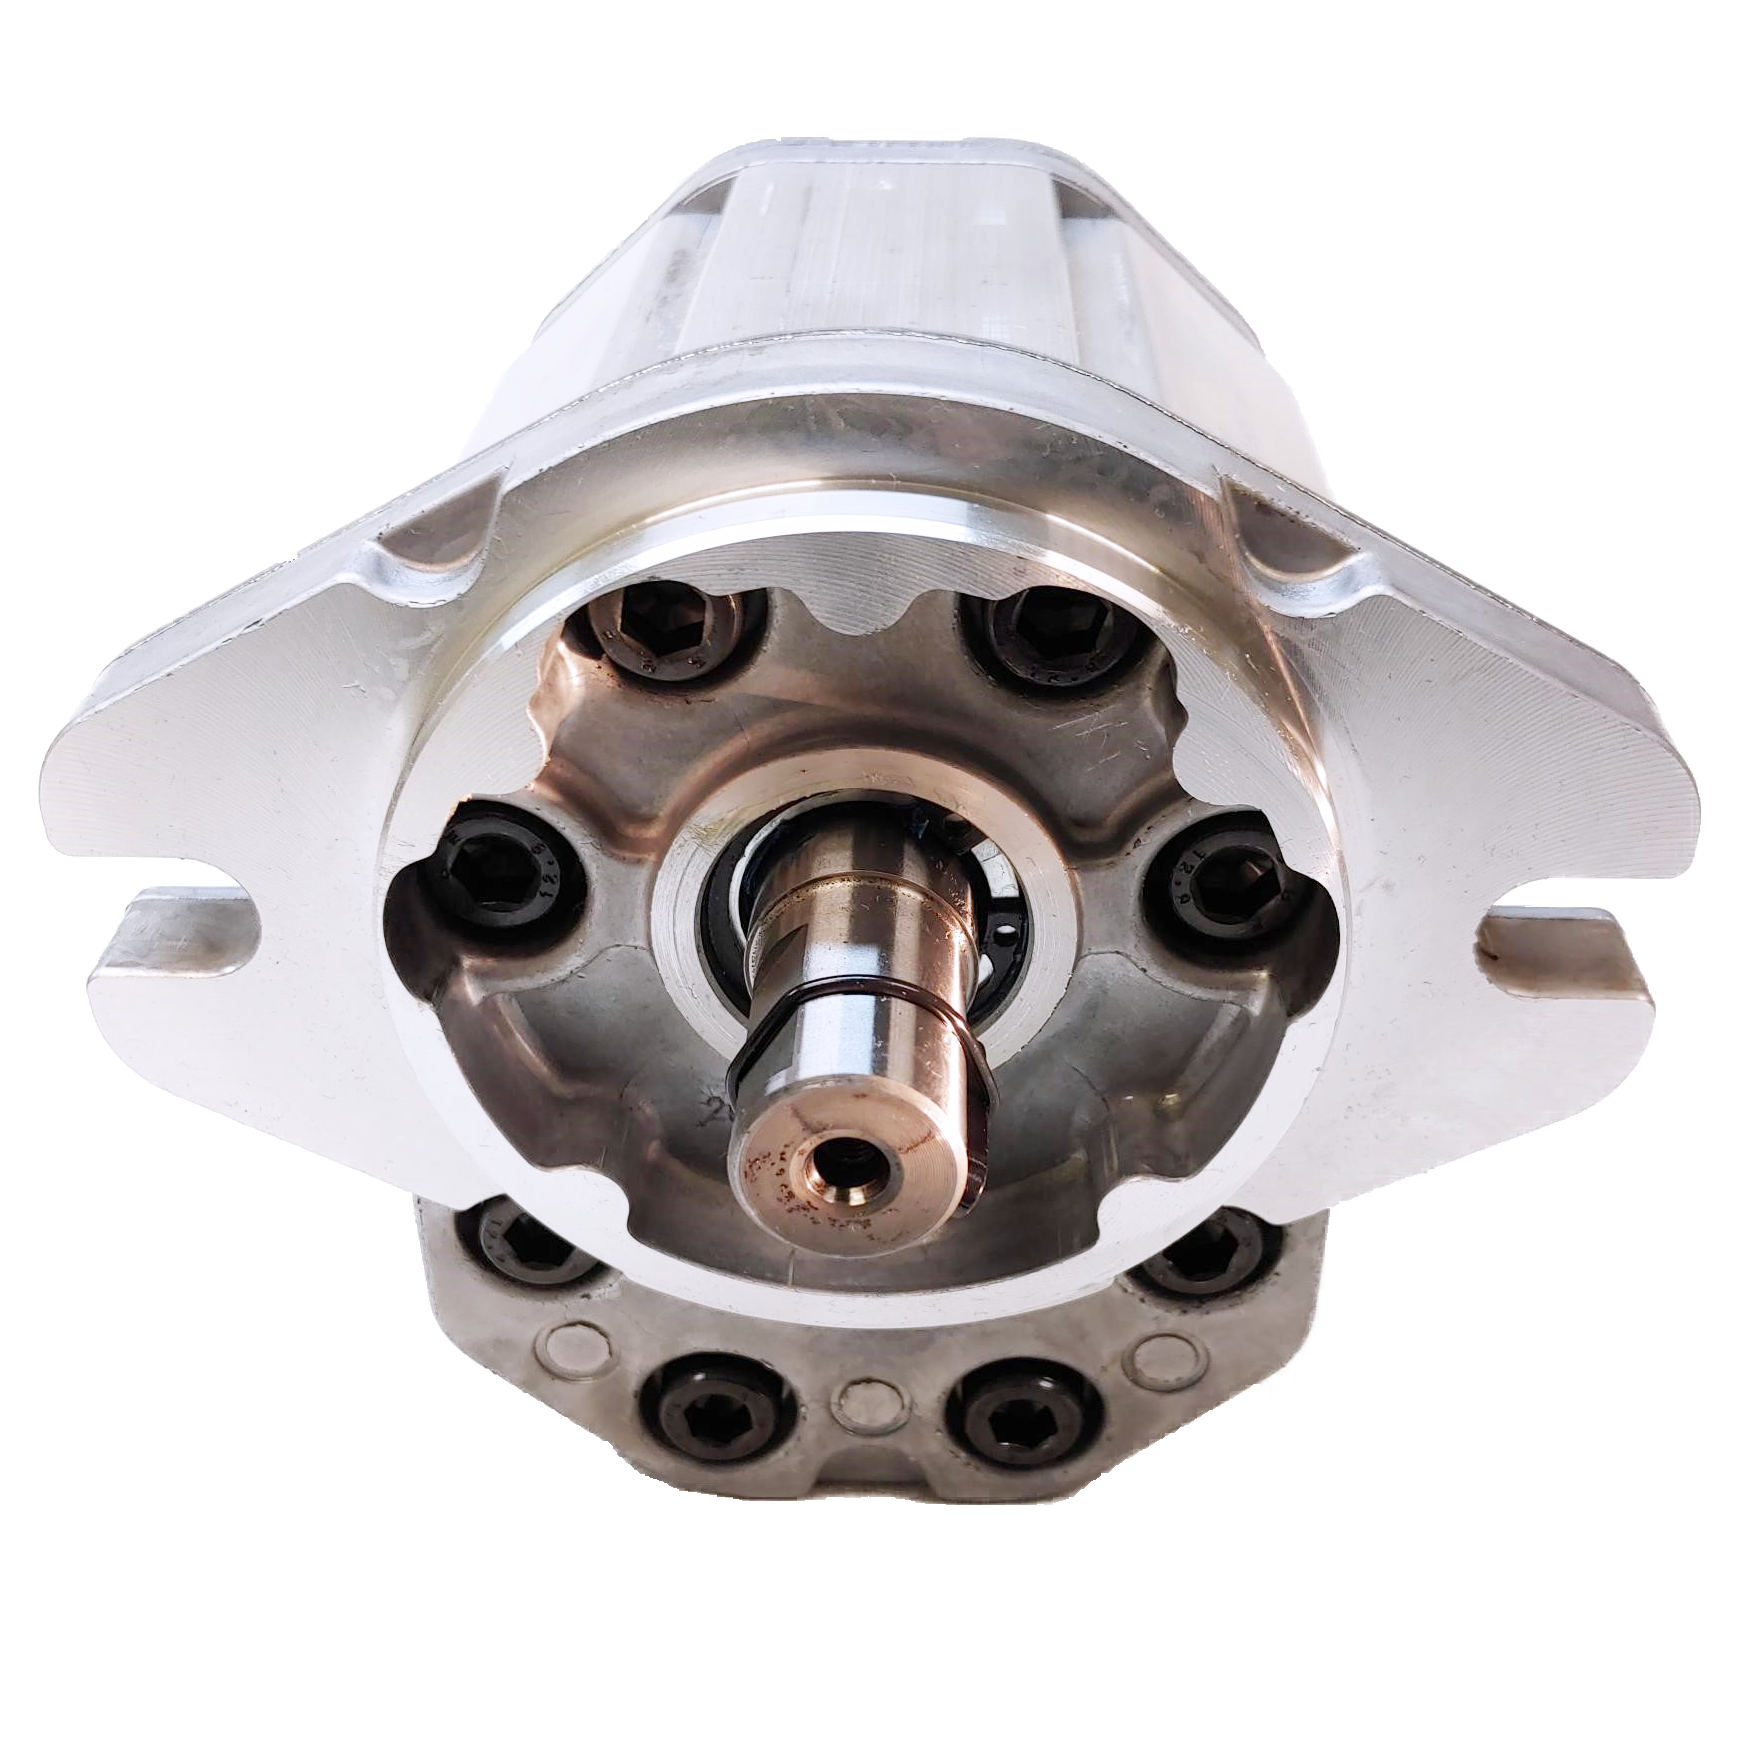 ALM3A-R-135-S1-FA-E4 : Marzocchi Gear Motor, Bidirectional, 87cc, 2030psi rated, 2000RPM, 1.5" (#24) SAE ports, 9T 16/32DP Splined Shaft